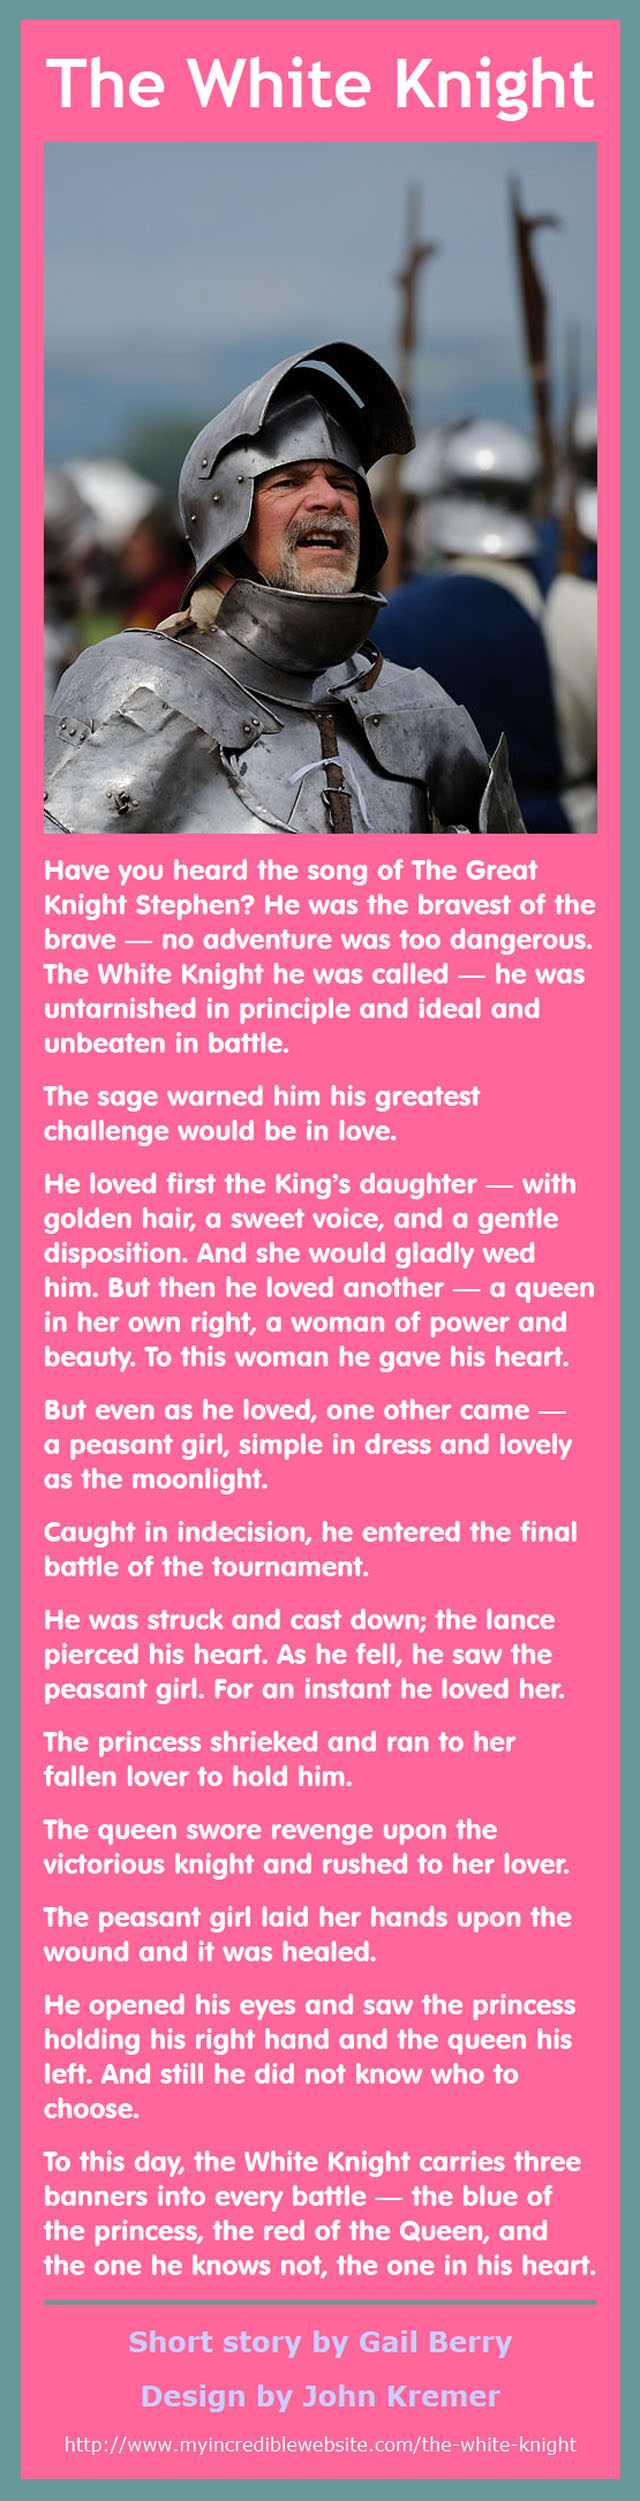 The White Knight short short story by Gail Berry